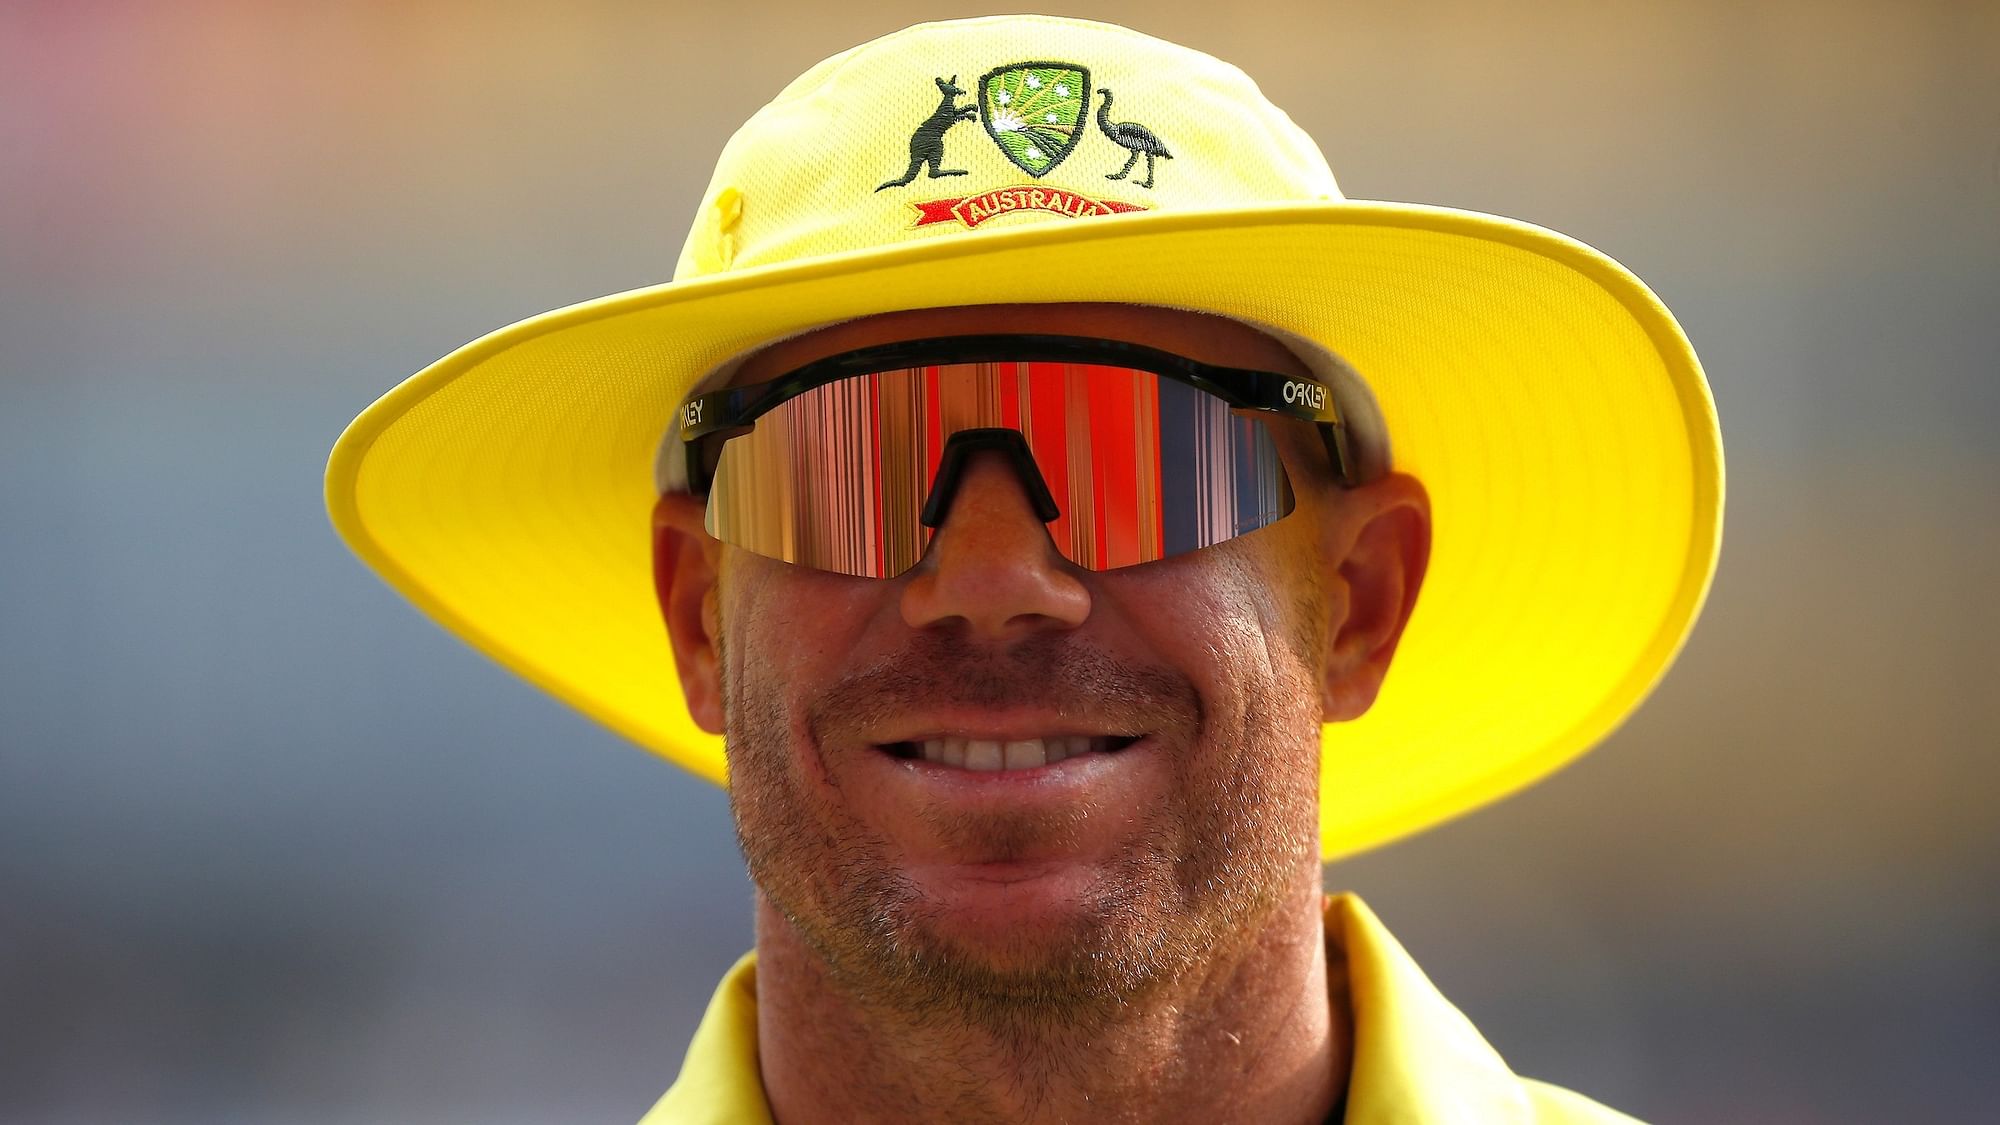 <div class="paragraphs"><p>David Warner reveals he planned to retire after 2023's Ashes Test at Lord's, ahead of his last Test match.</p></div>